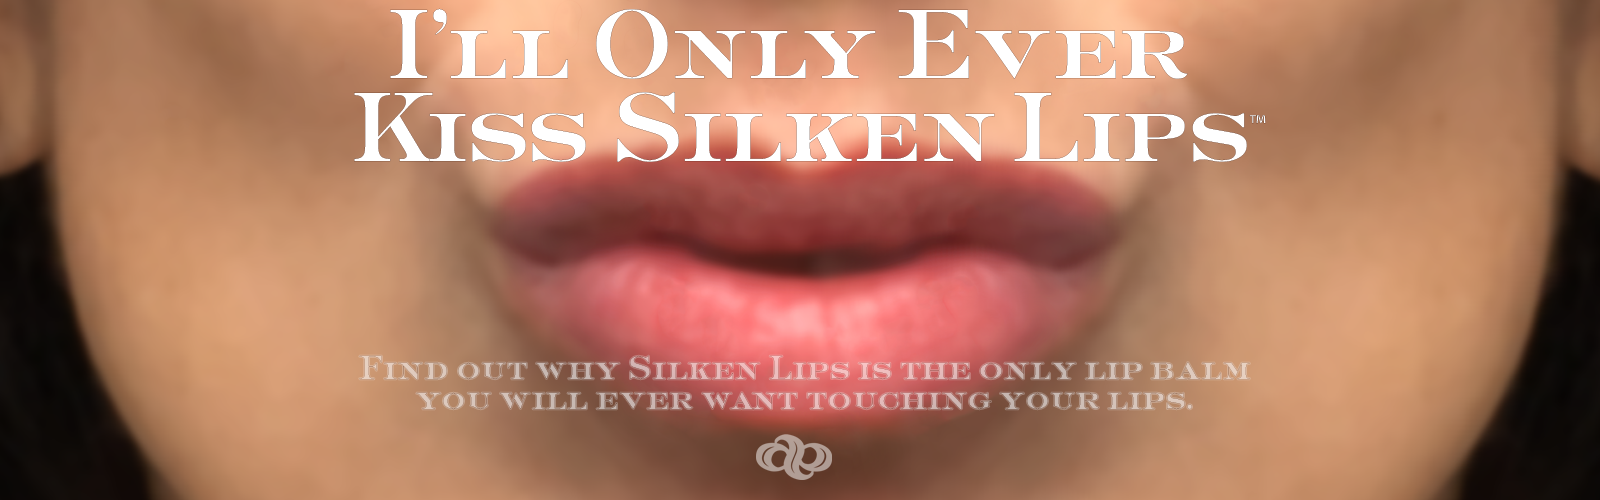 png of "I'll Only Ever Kiss Silken Lips" campaign photo with a beautiful pair of lips poised straight on for a kiss in the background. At the bottom in the foreground it reads "find out why silken lips is the only lip balm you will ever want touching your lips".